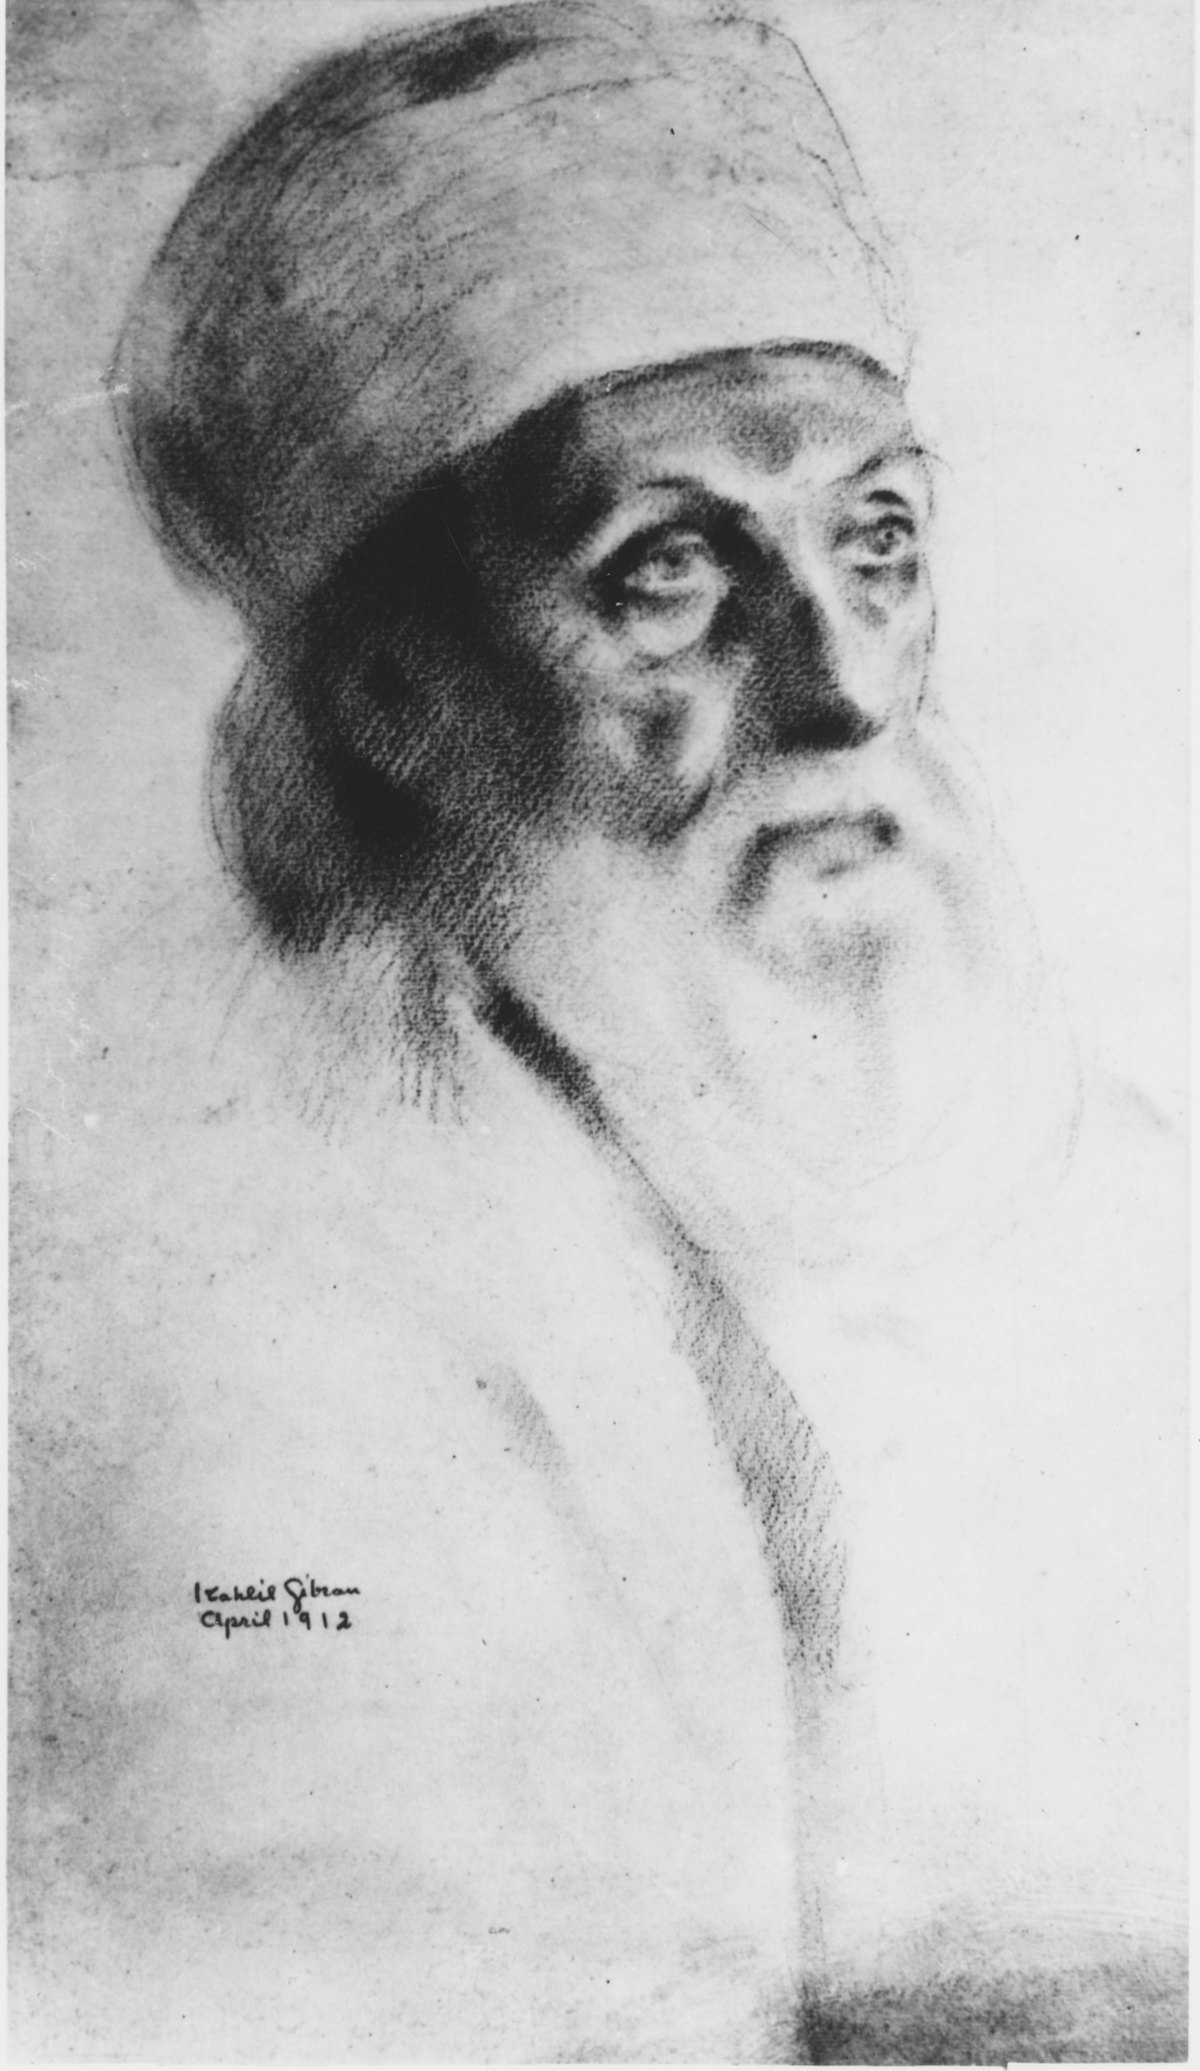 Juliet Thompson knew of Kahlil Gibran's portraits of well-known figures in philosophy and art. It was through Thompson that Gibran met 'Abdu'l-Baha and sketched this portrait of Him in the spring of 1912.